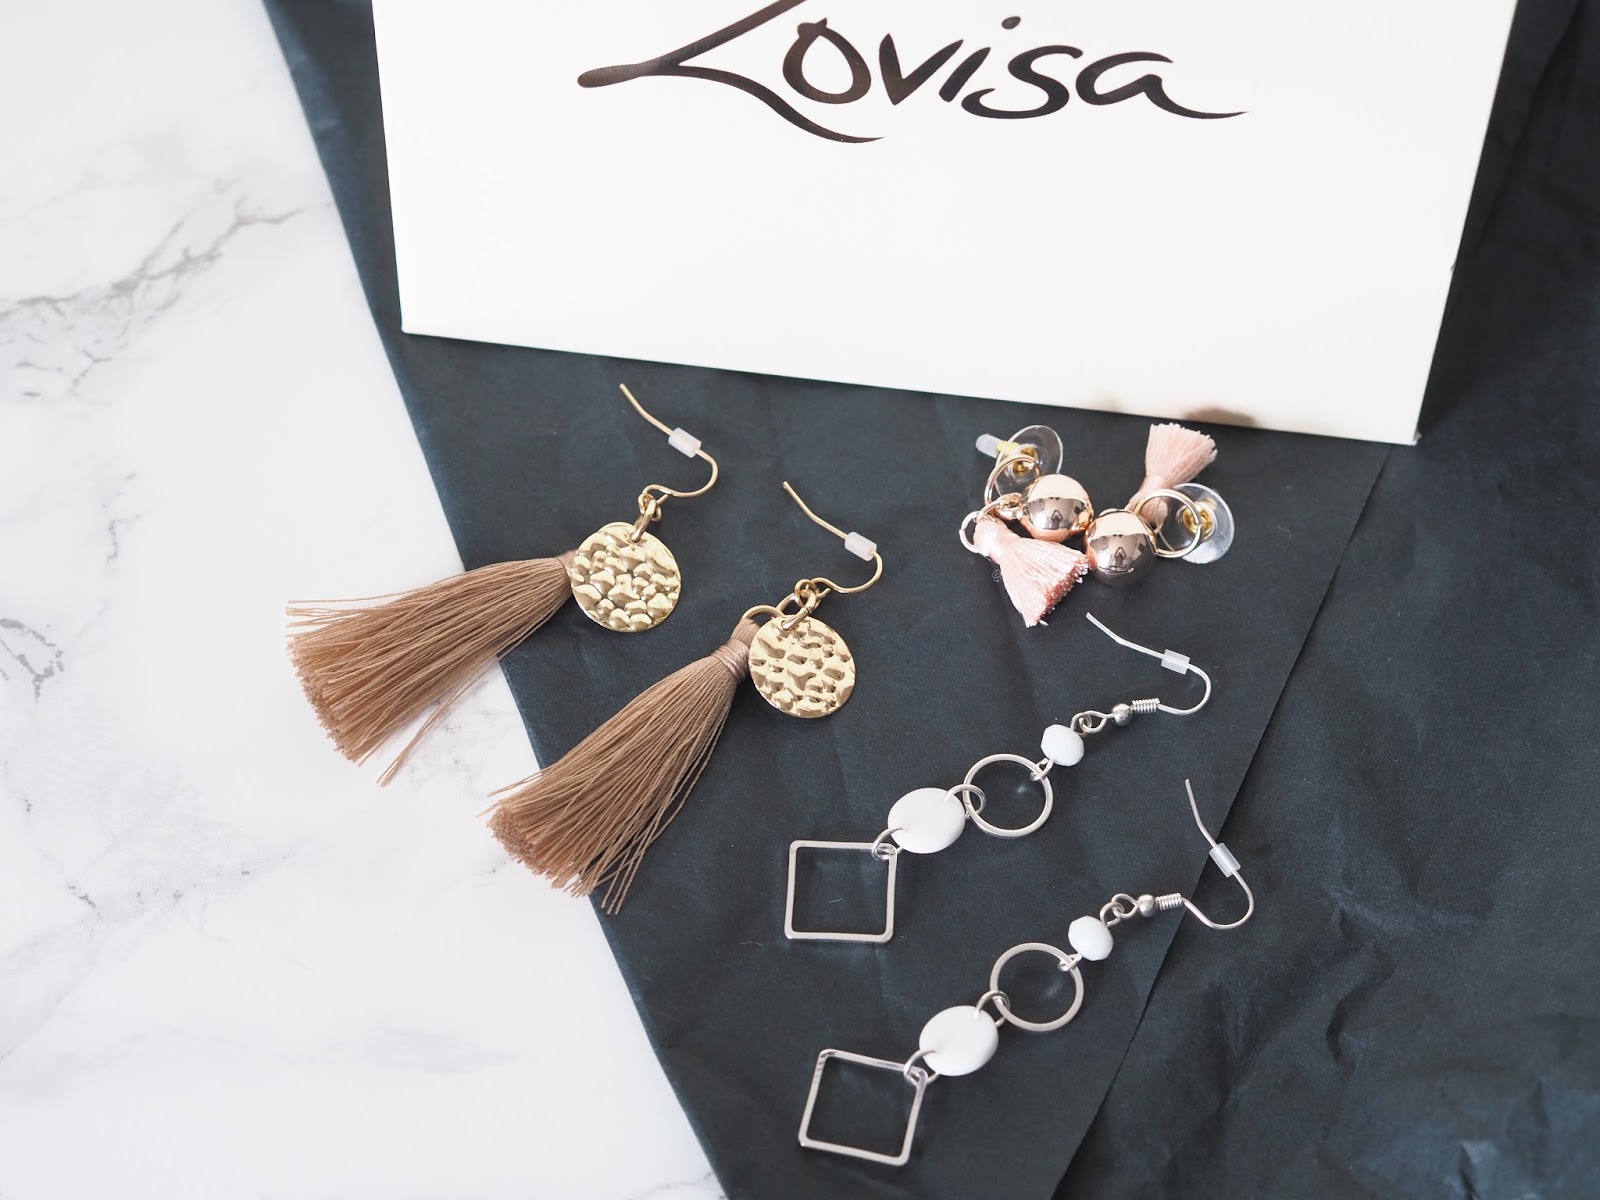 Tassell earrings from Lovisa \ style accessories \ jewellery \ Priceless Life of Mine \ Over 40 lifestyle blog